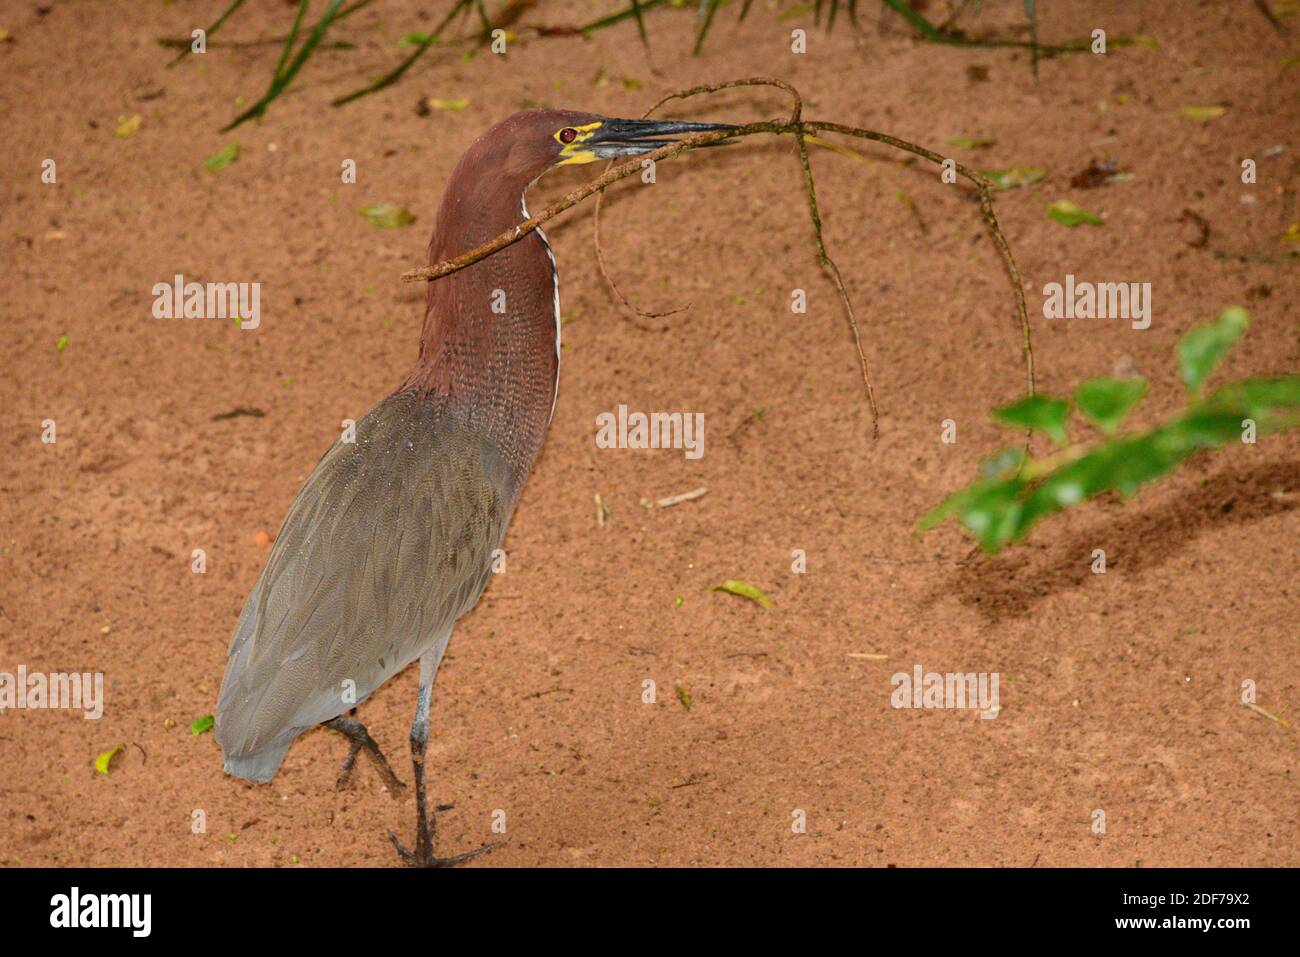 Rufescent tiger heron (Tigrisoma lineatum) is a kind of heron native to Central and South America. This photo was taken in Brazil. Stock Photo